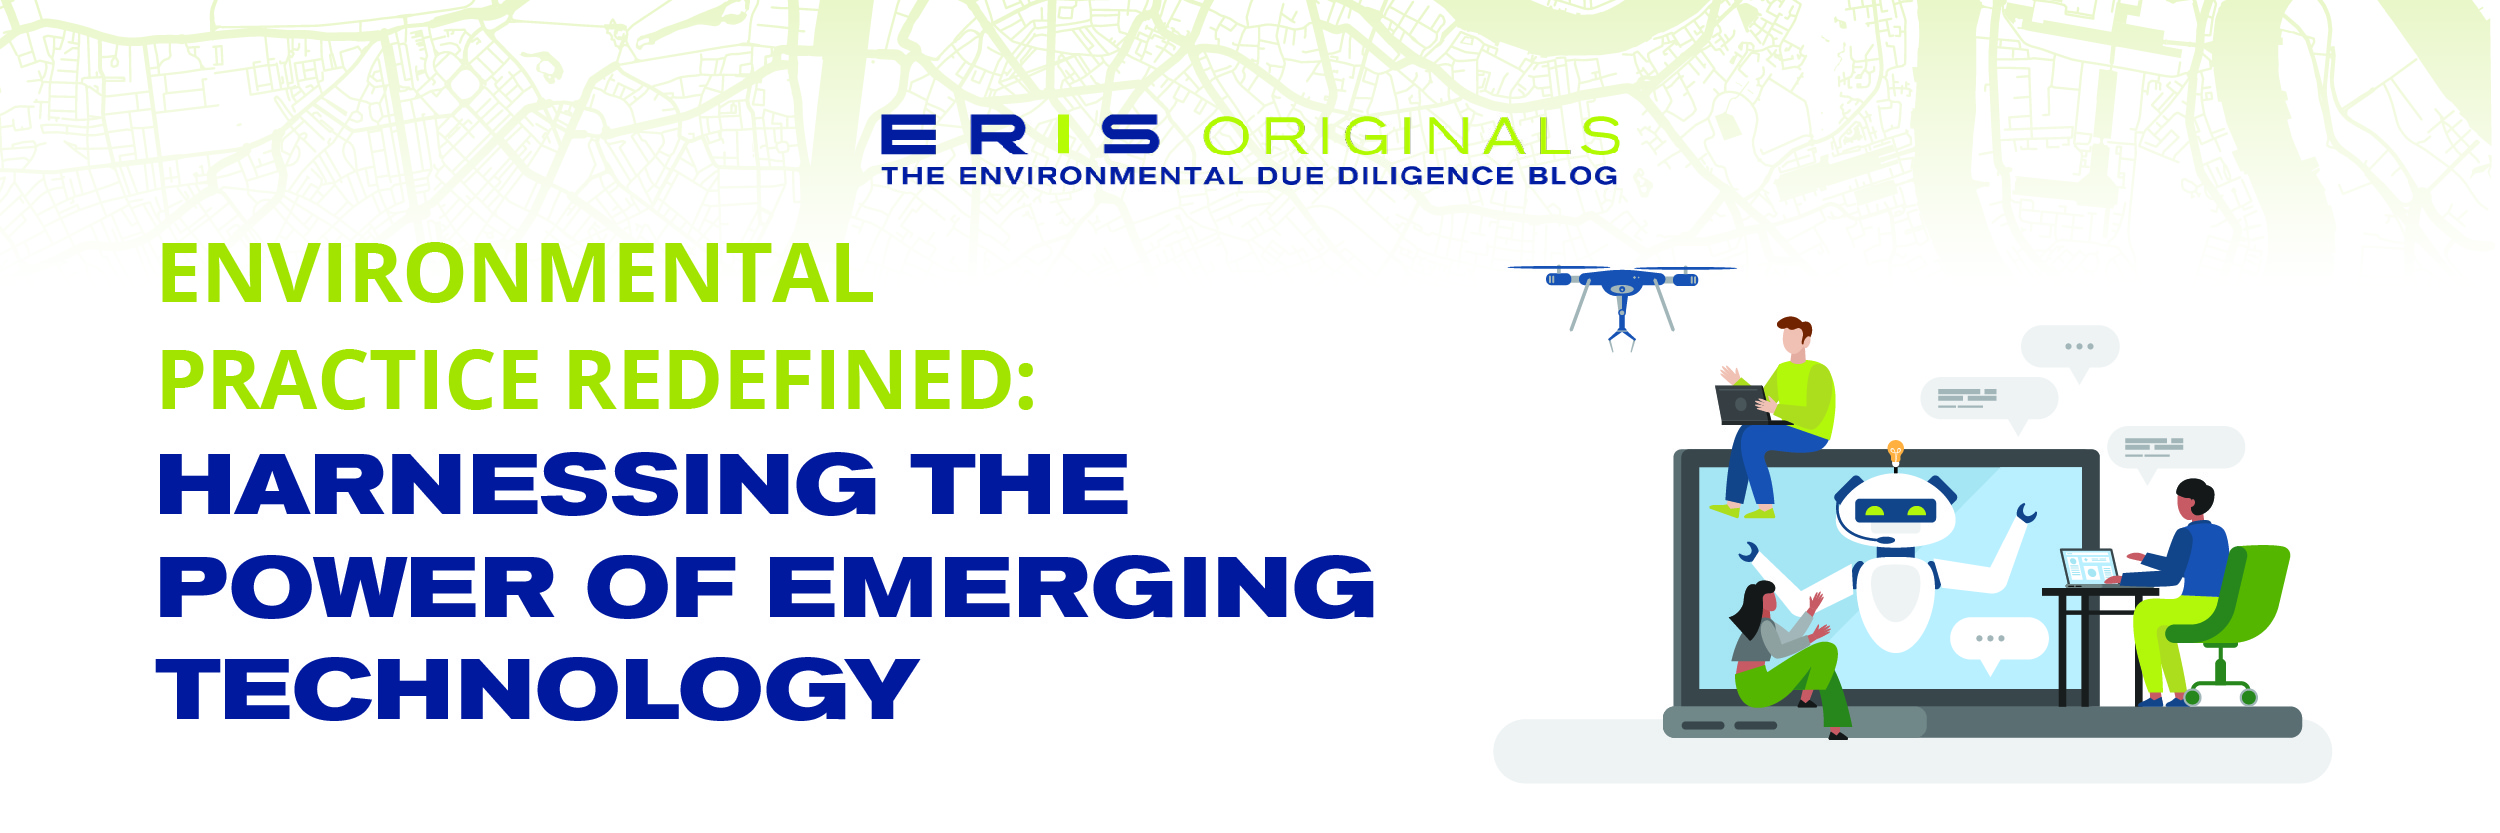 ENVIRONMENTAL PRACTICE REDEFINED: HARNESSING THE POWER OF EMERGING TECHNOLOGY banner